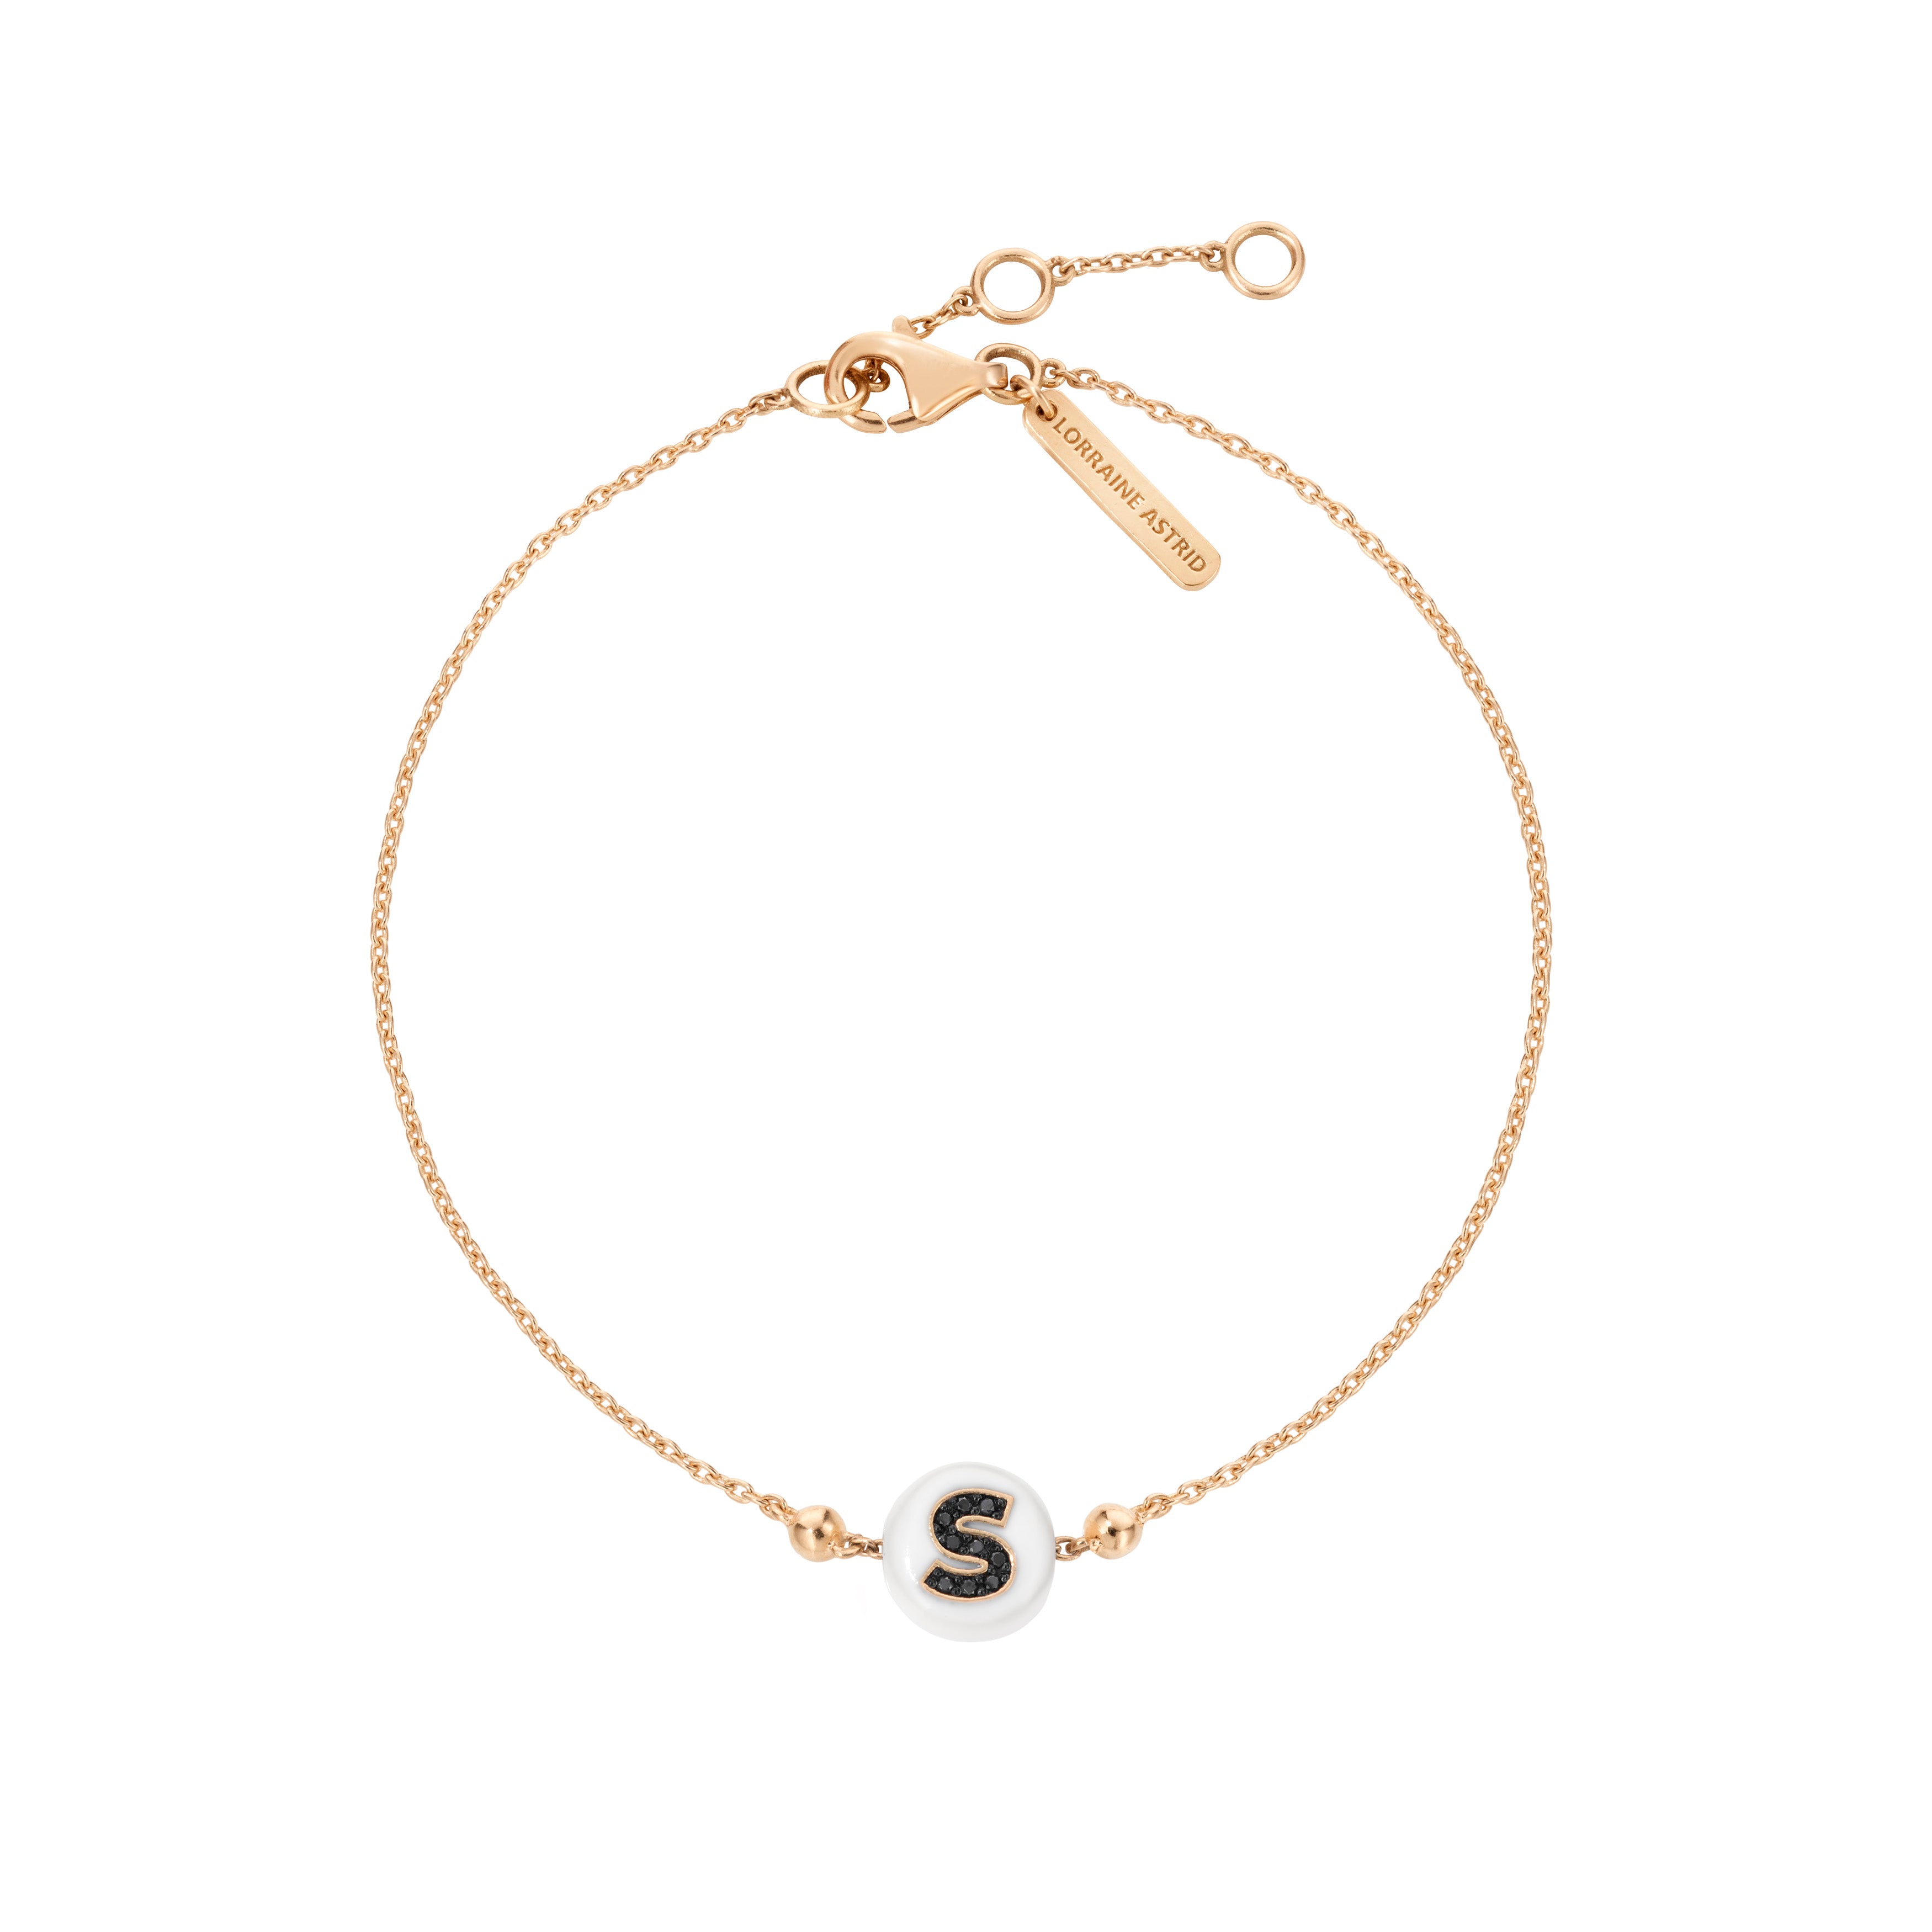 Children's Bracelet with one Letter bead on chain in 18K rose gold